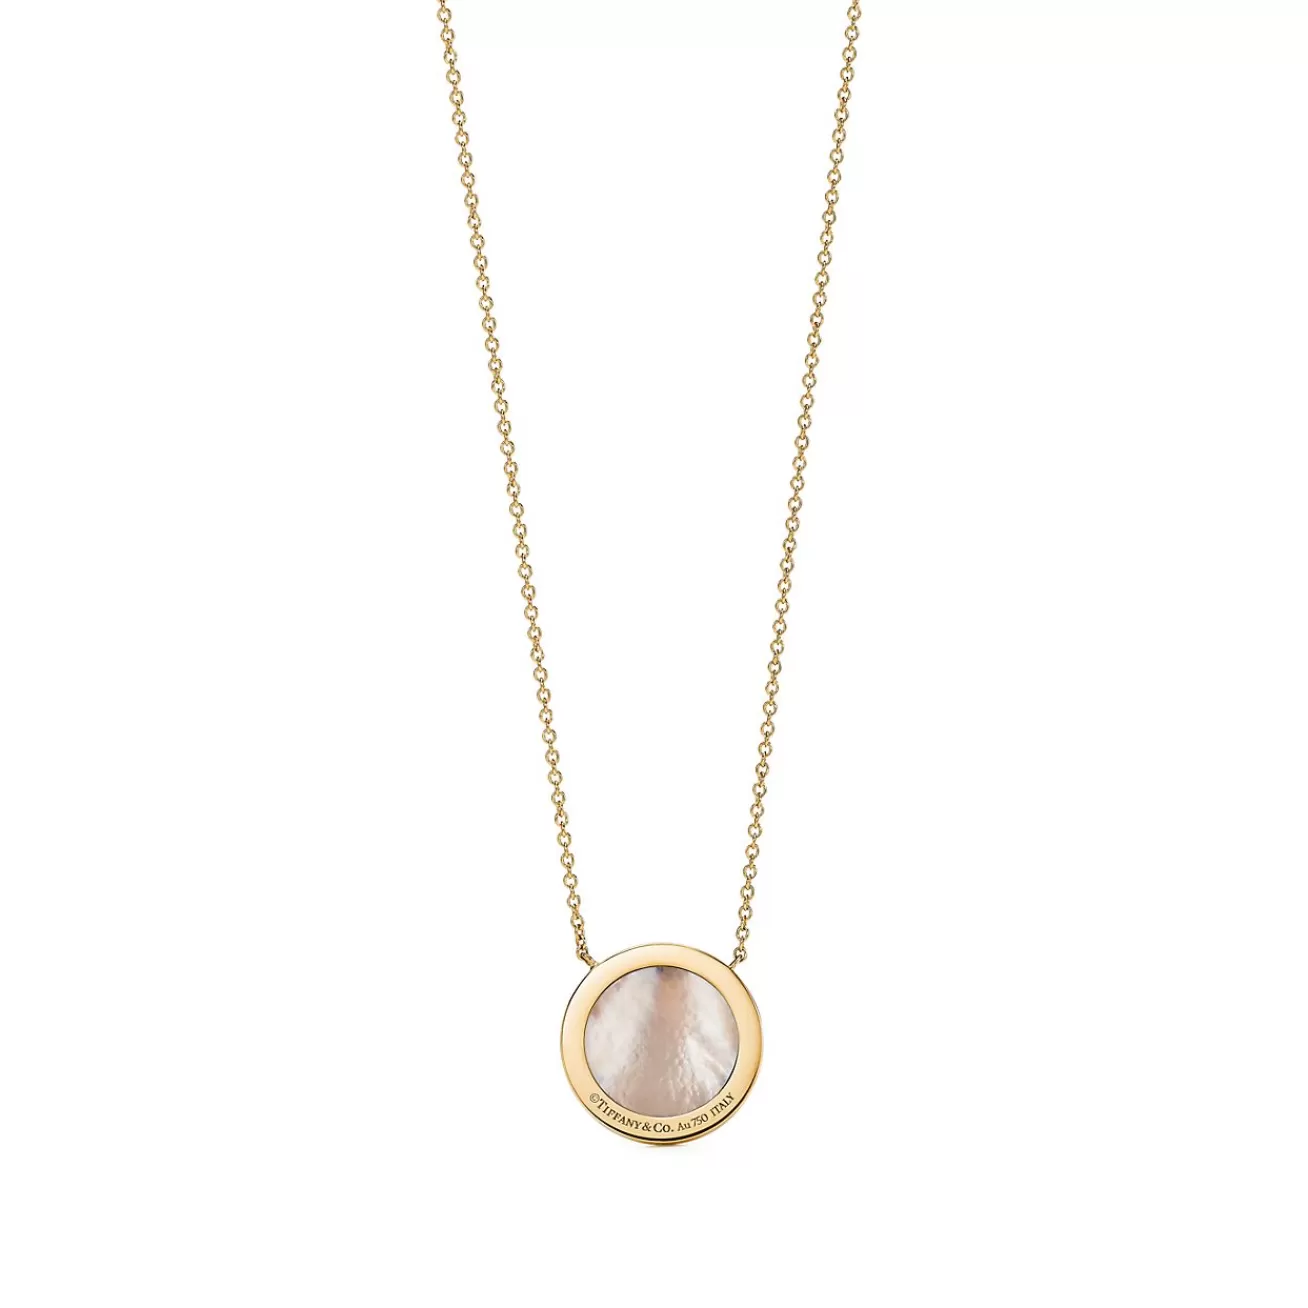 Tiffany & Co. Tiffany T diamond and mother-of-pearl circle pendant in 18k gold. | ^ Necklaces & Pendants | Gold Jewelry